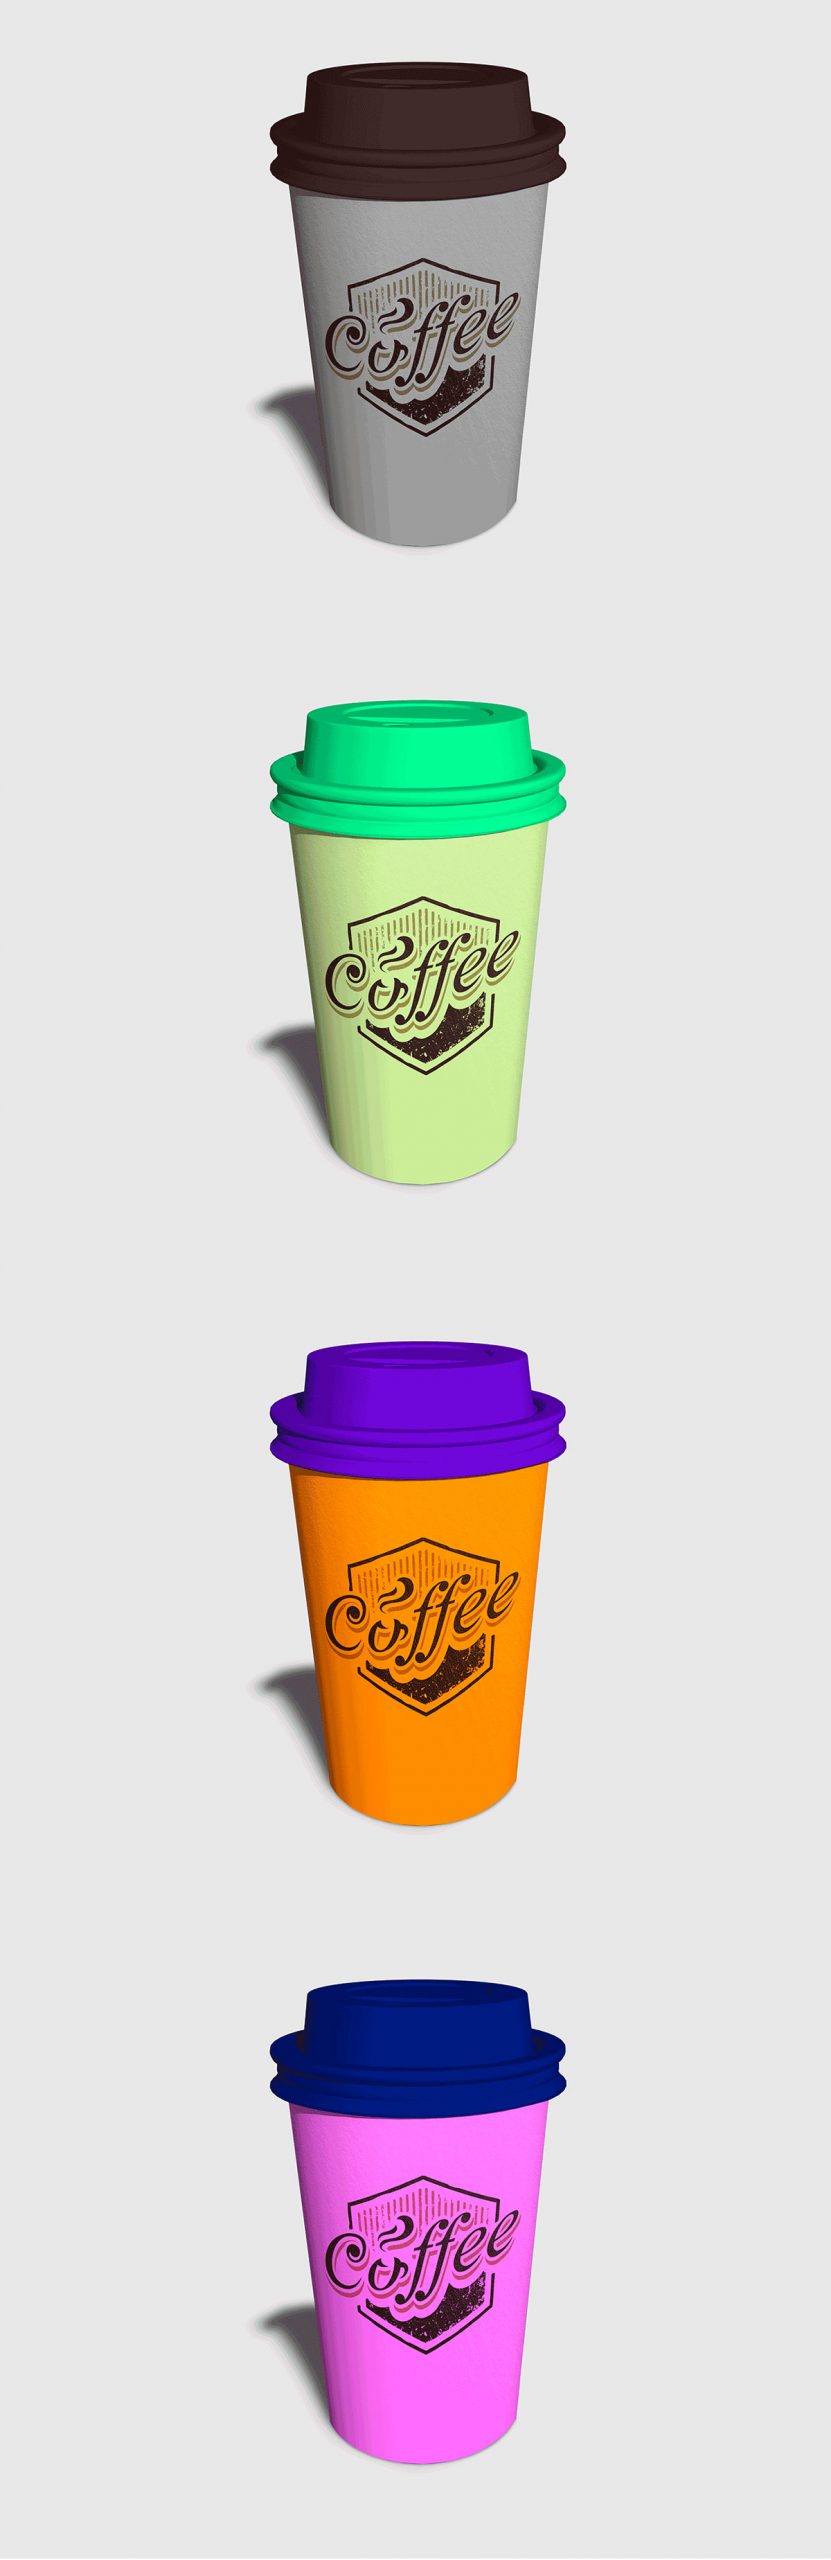 Coffee Cup Photorealistic Mockup Free Download